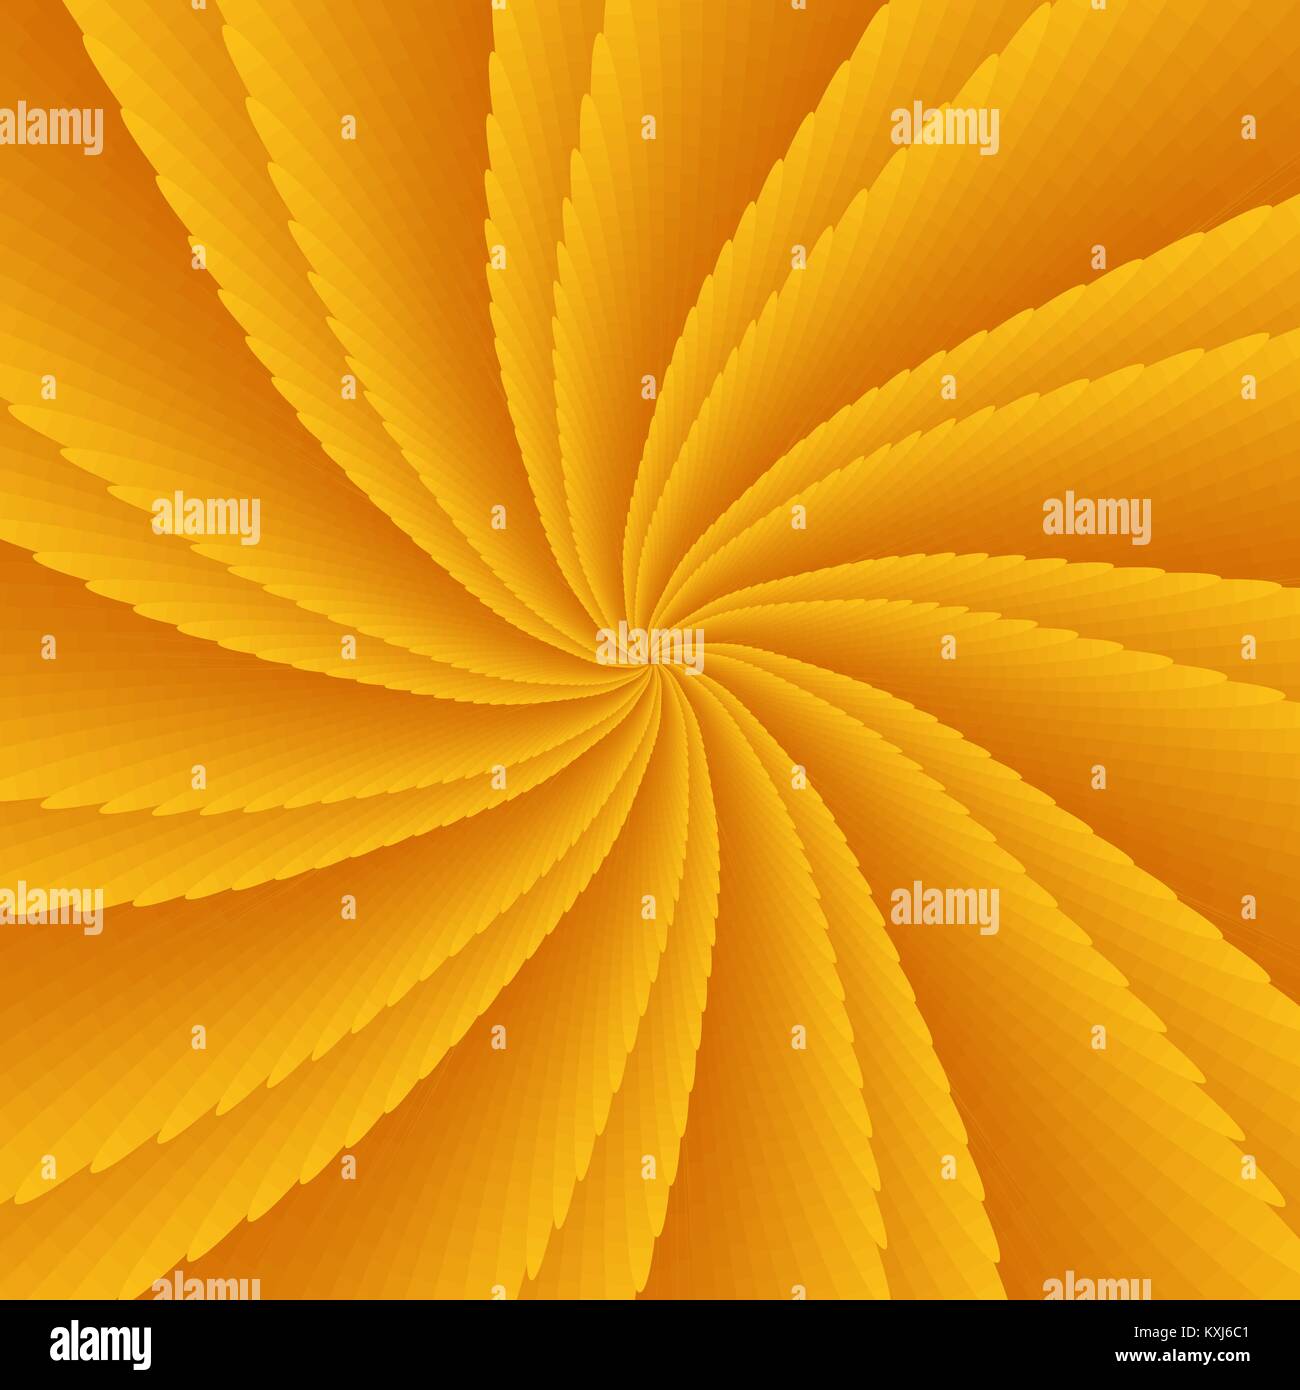 Abstract orange twisted optical illusion, creative vector spiral symmetric background with gradient petals and slices Stock Vector